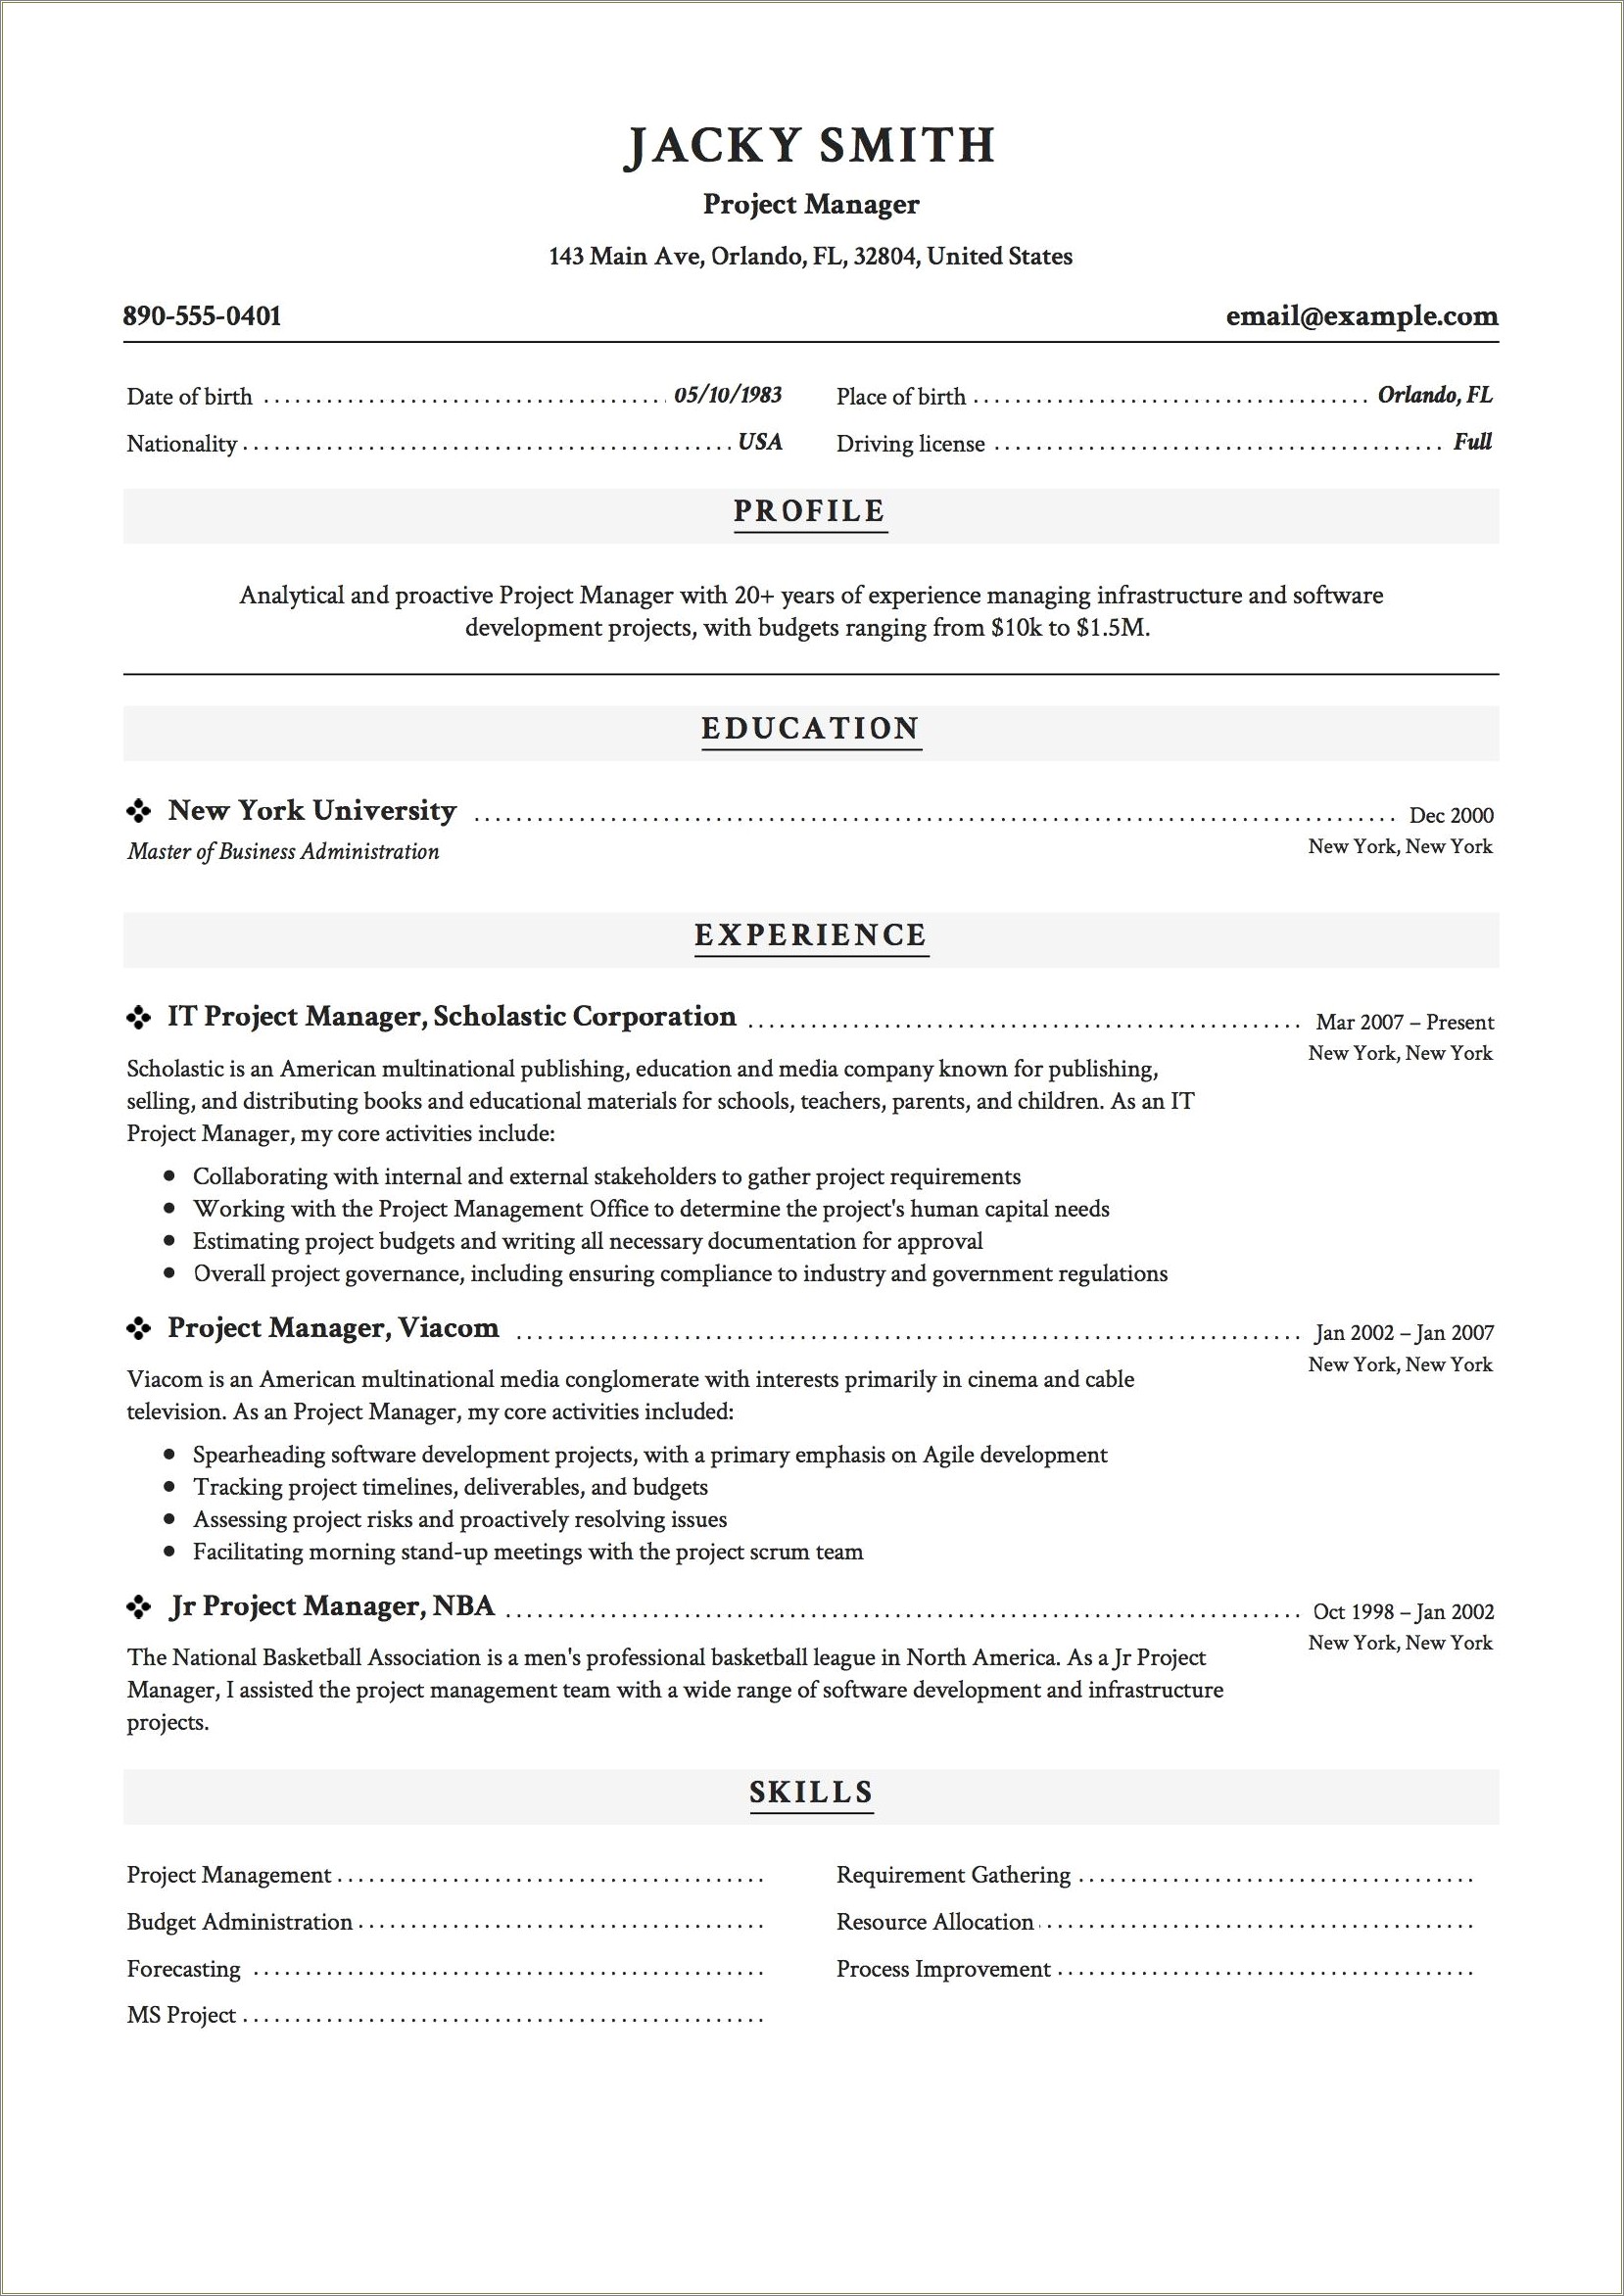 Good Objective For Construction Management Resume